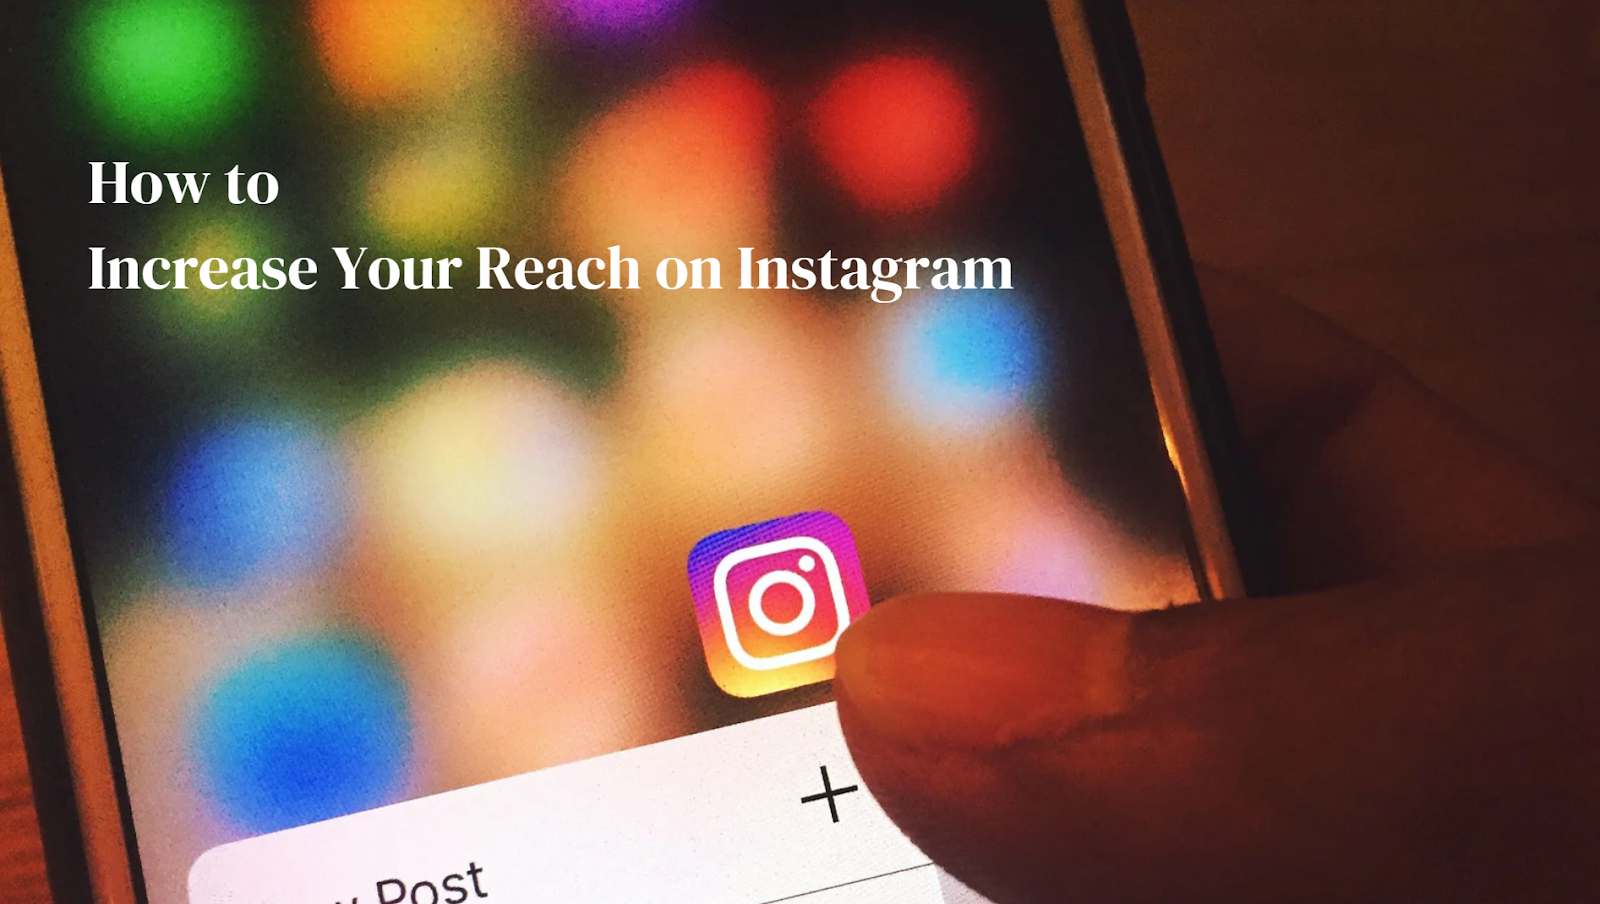 How to Increase Your Reach on Instagram